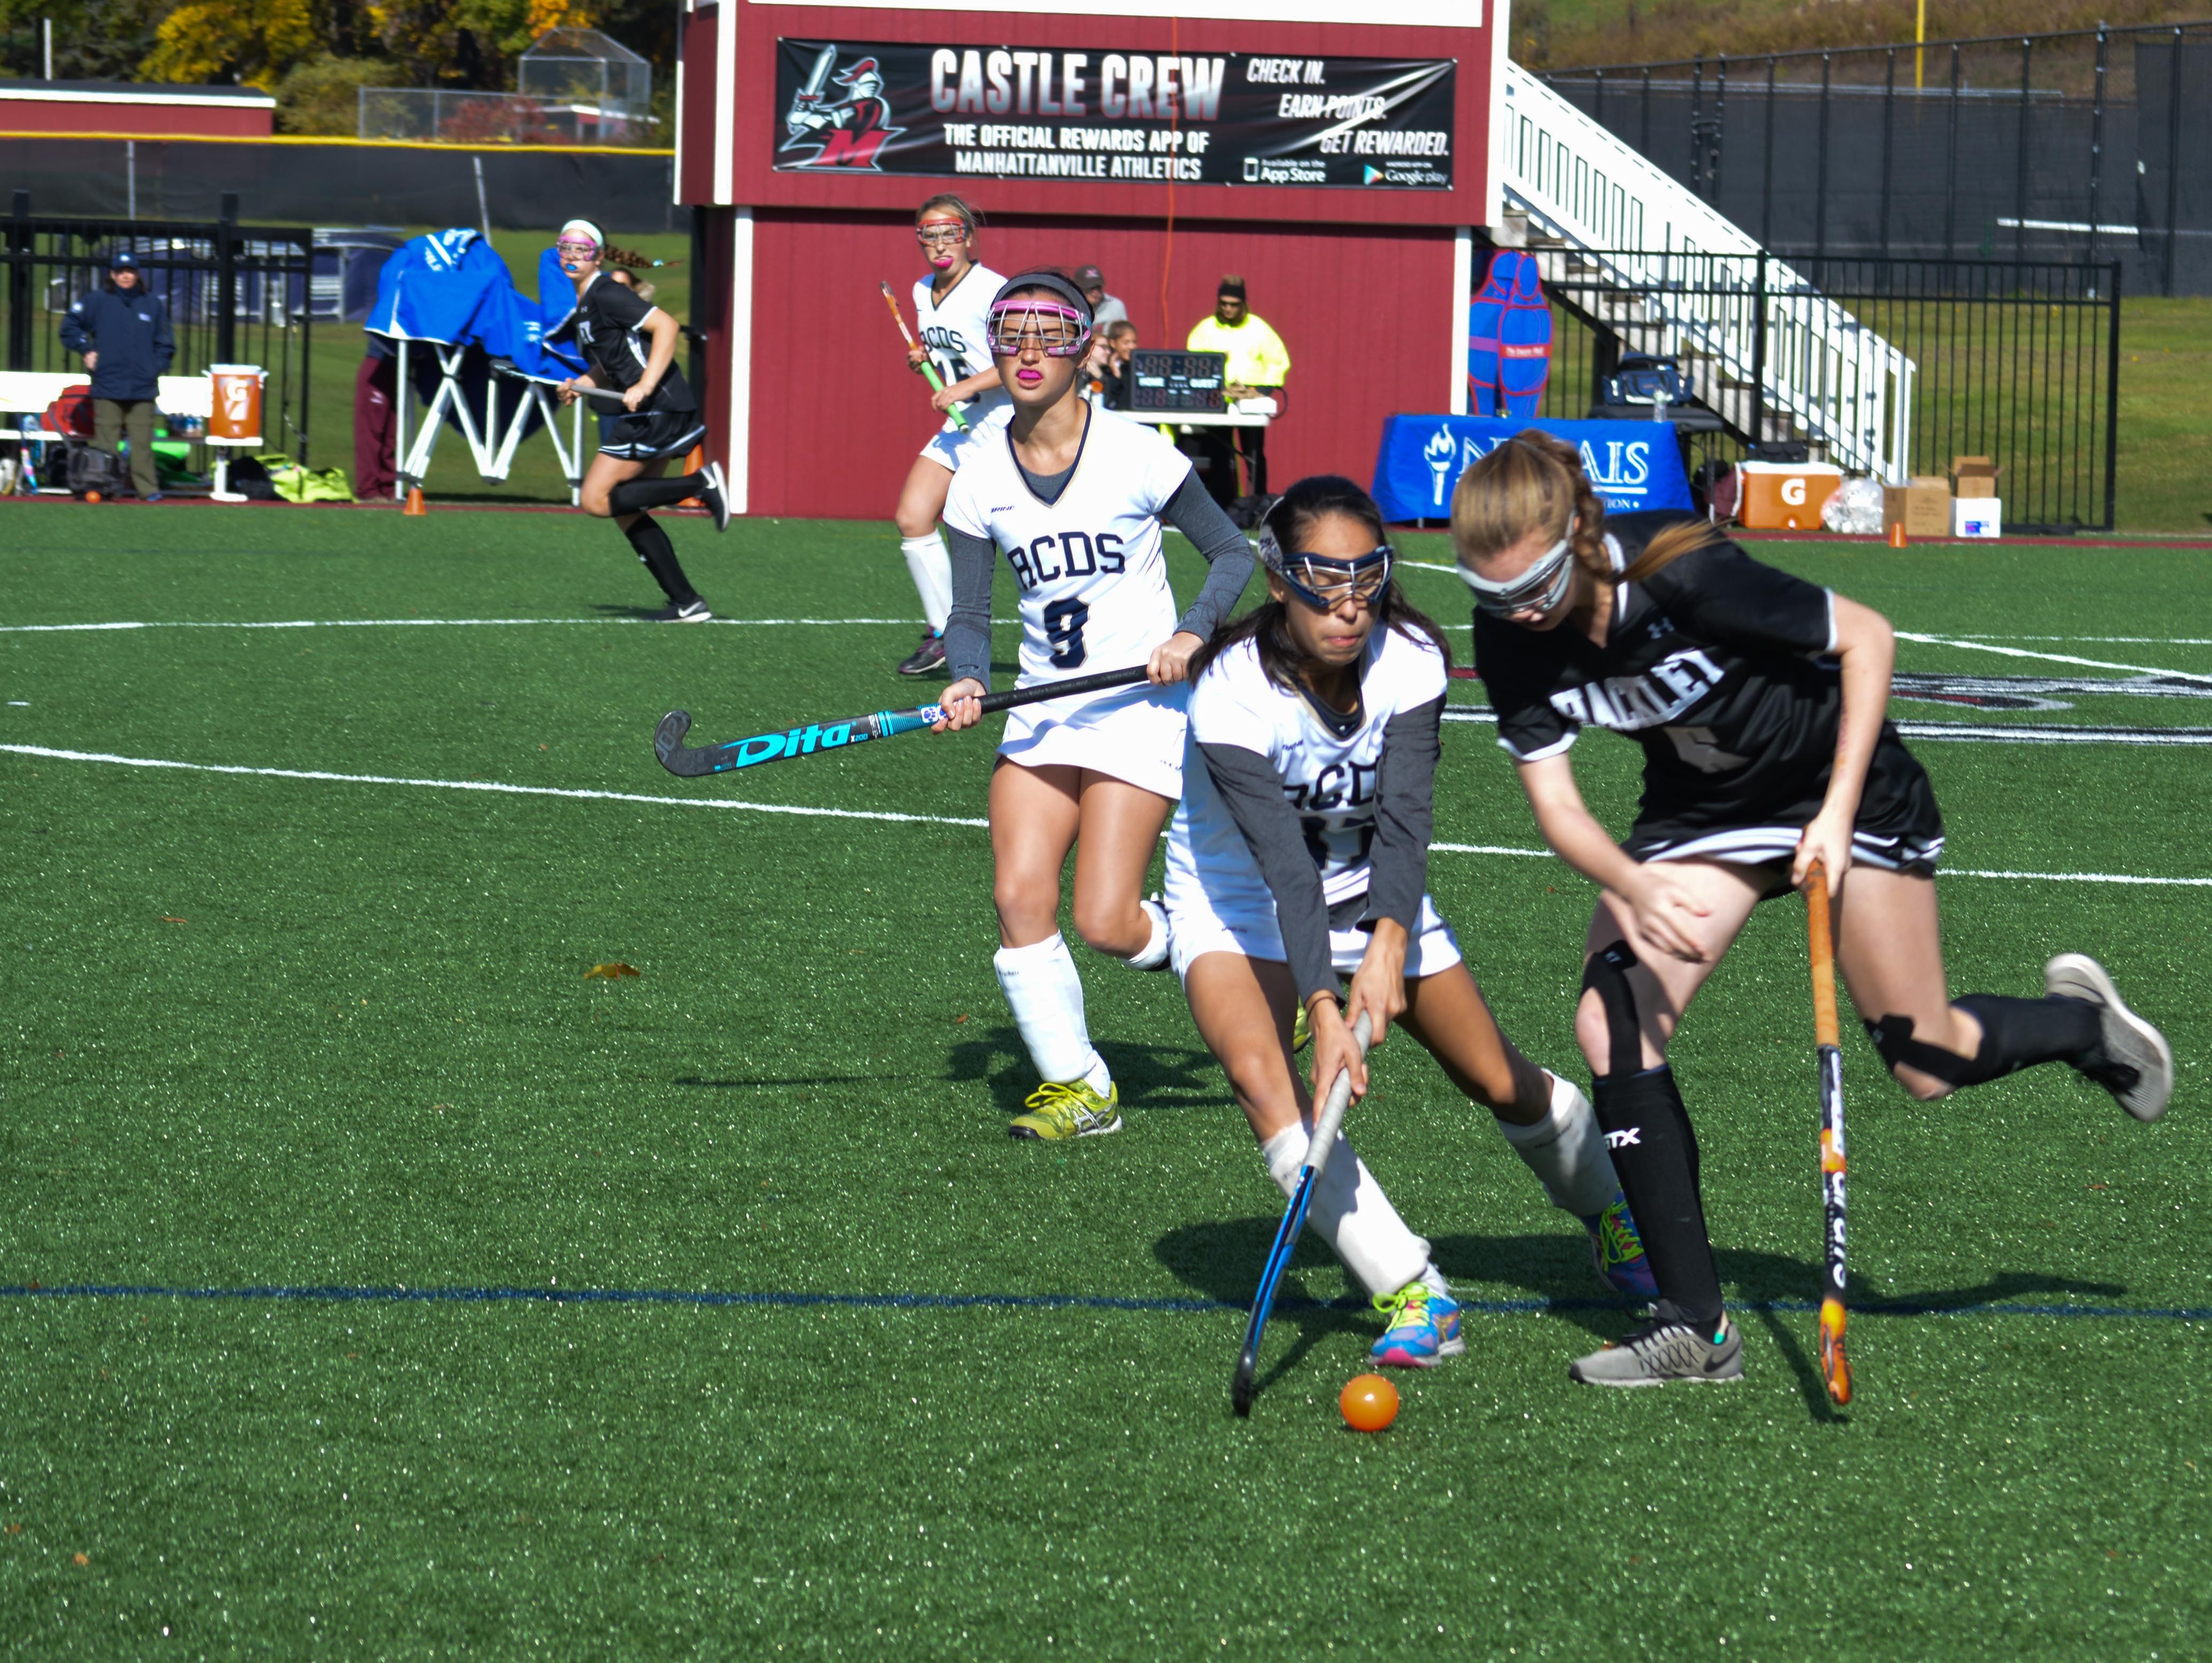 Hackley School's Karina Bridger defends against Rye Country Day's Olivia Weaver the 2016 NYSAIS field hockey final at Manhattanville College on Nov. 6, 2016.